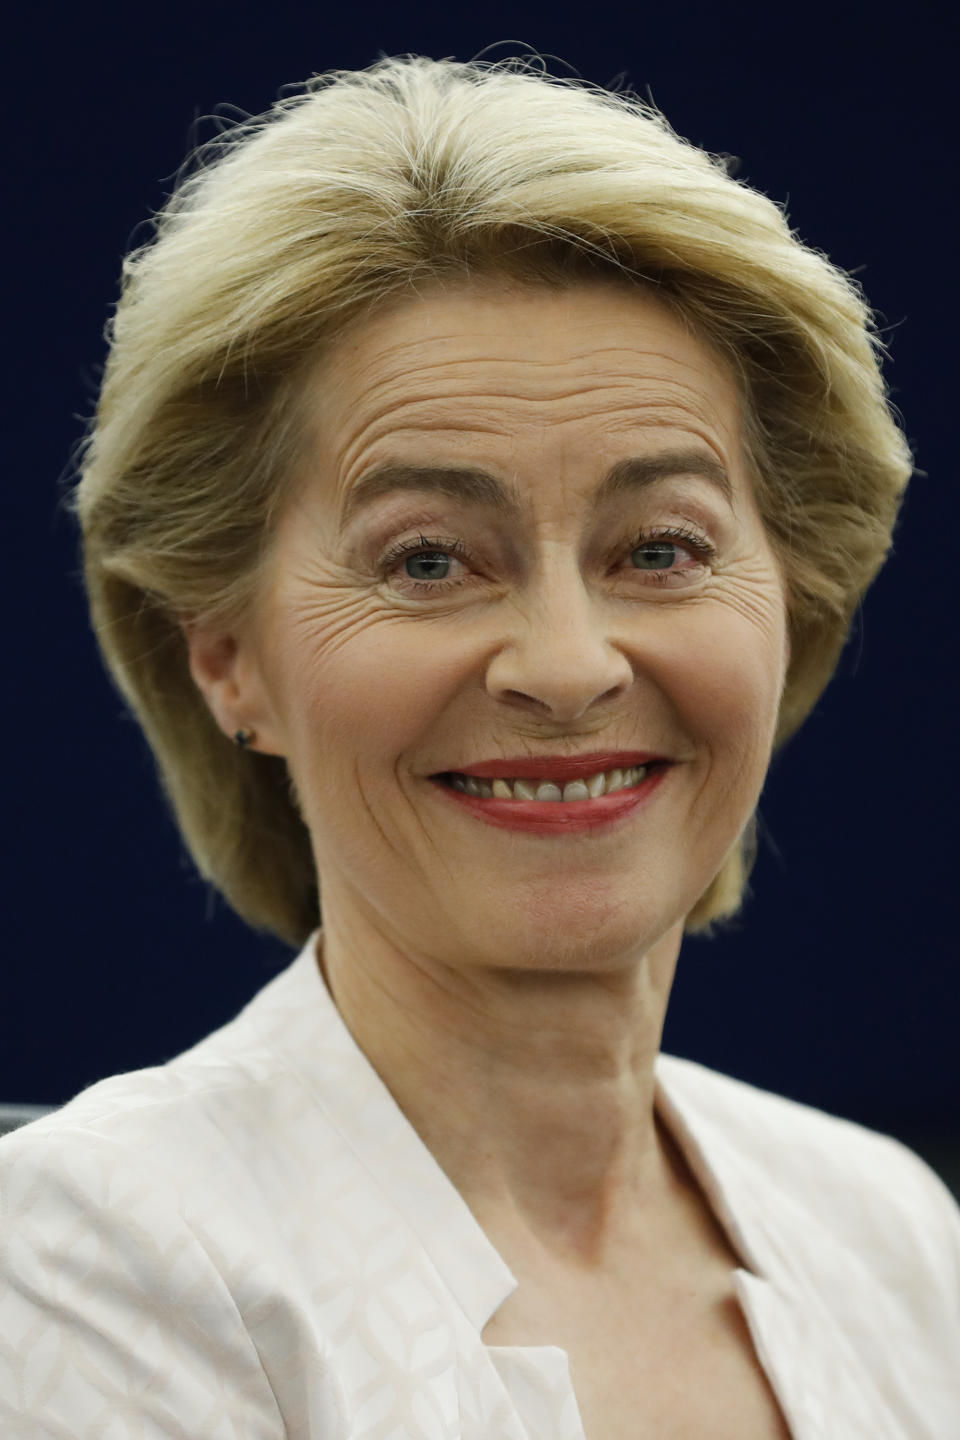 Ursula von der Leyen, the candidate to succeed Jean-Claude Juncker as head of the EU executive, smiles during a session at the European Parliament in Strasbourg, eastern France, Tuesday, July 16, 2019. (AP Photo/Jean-Francois Badias)